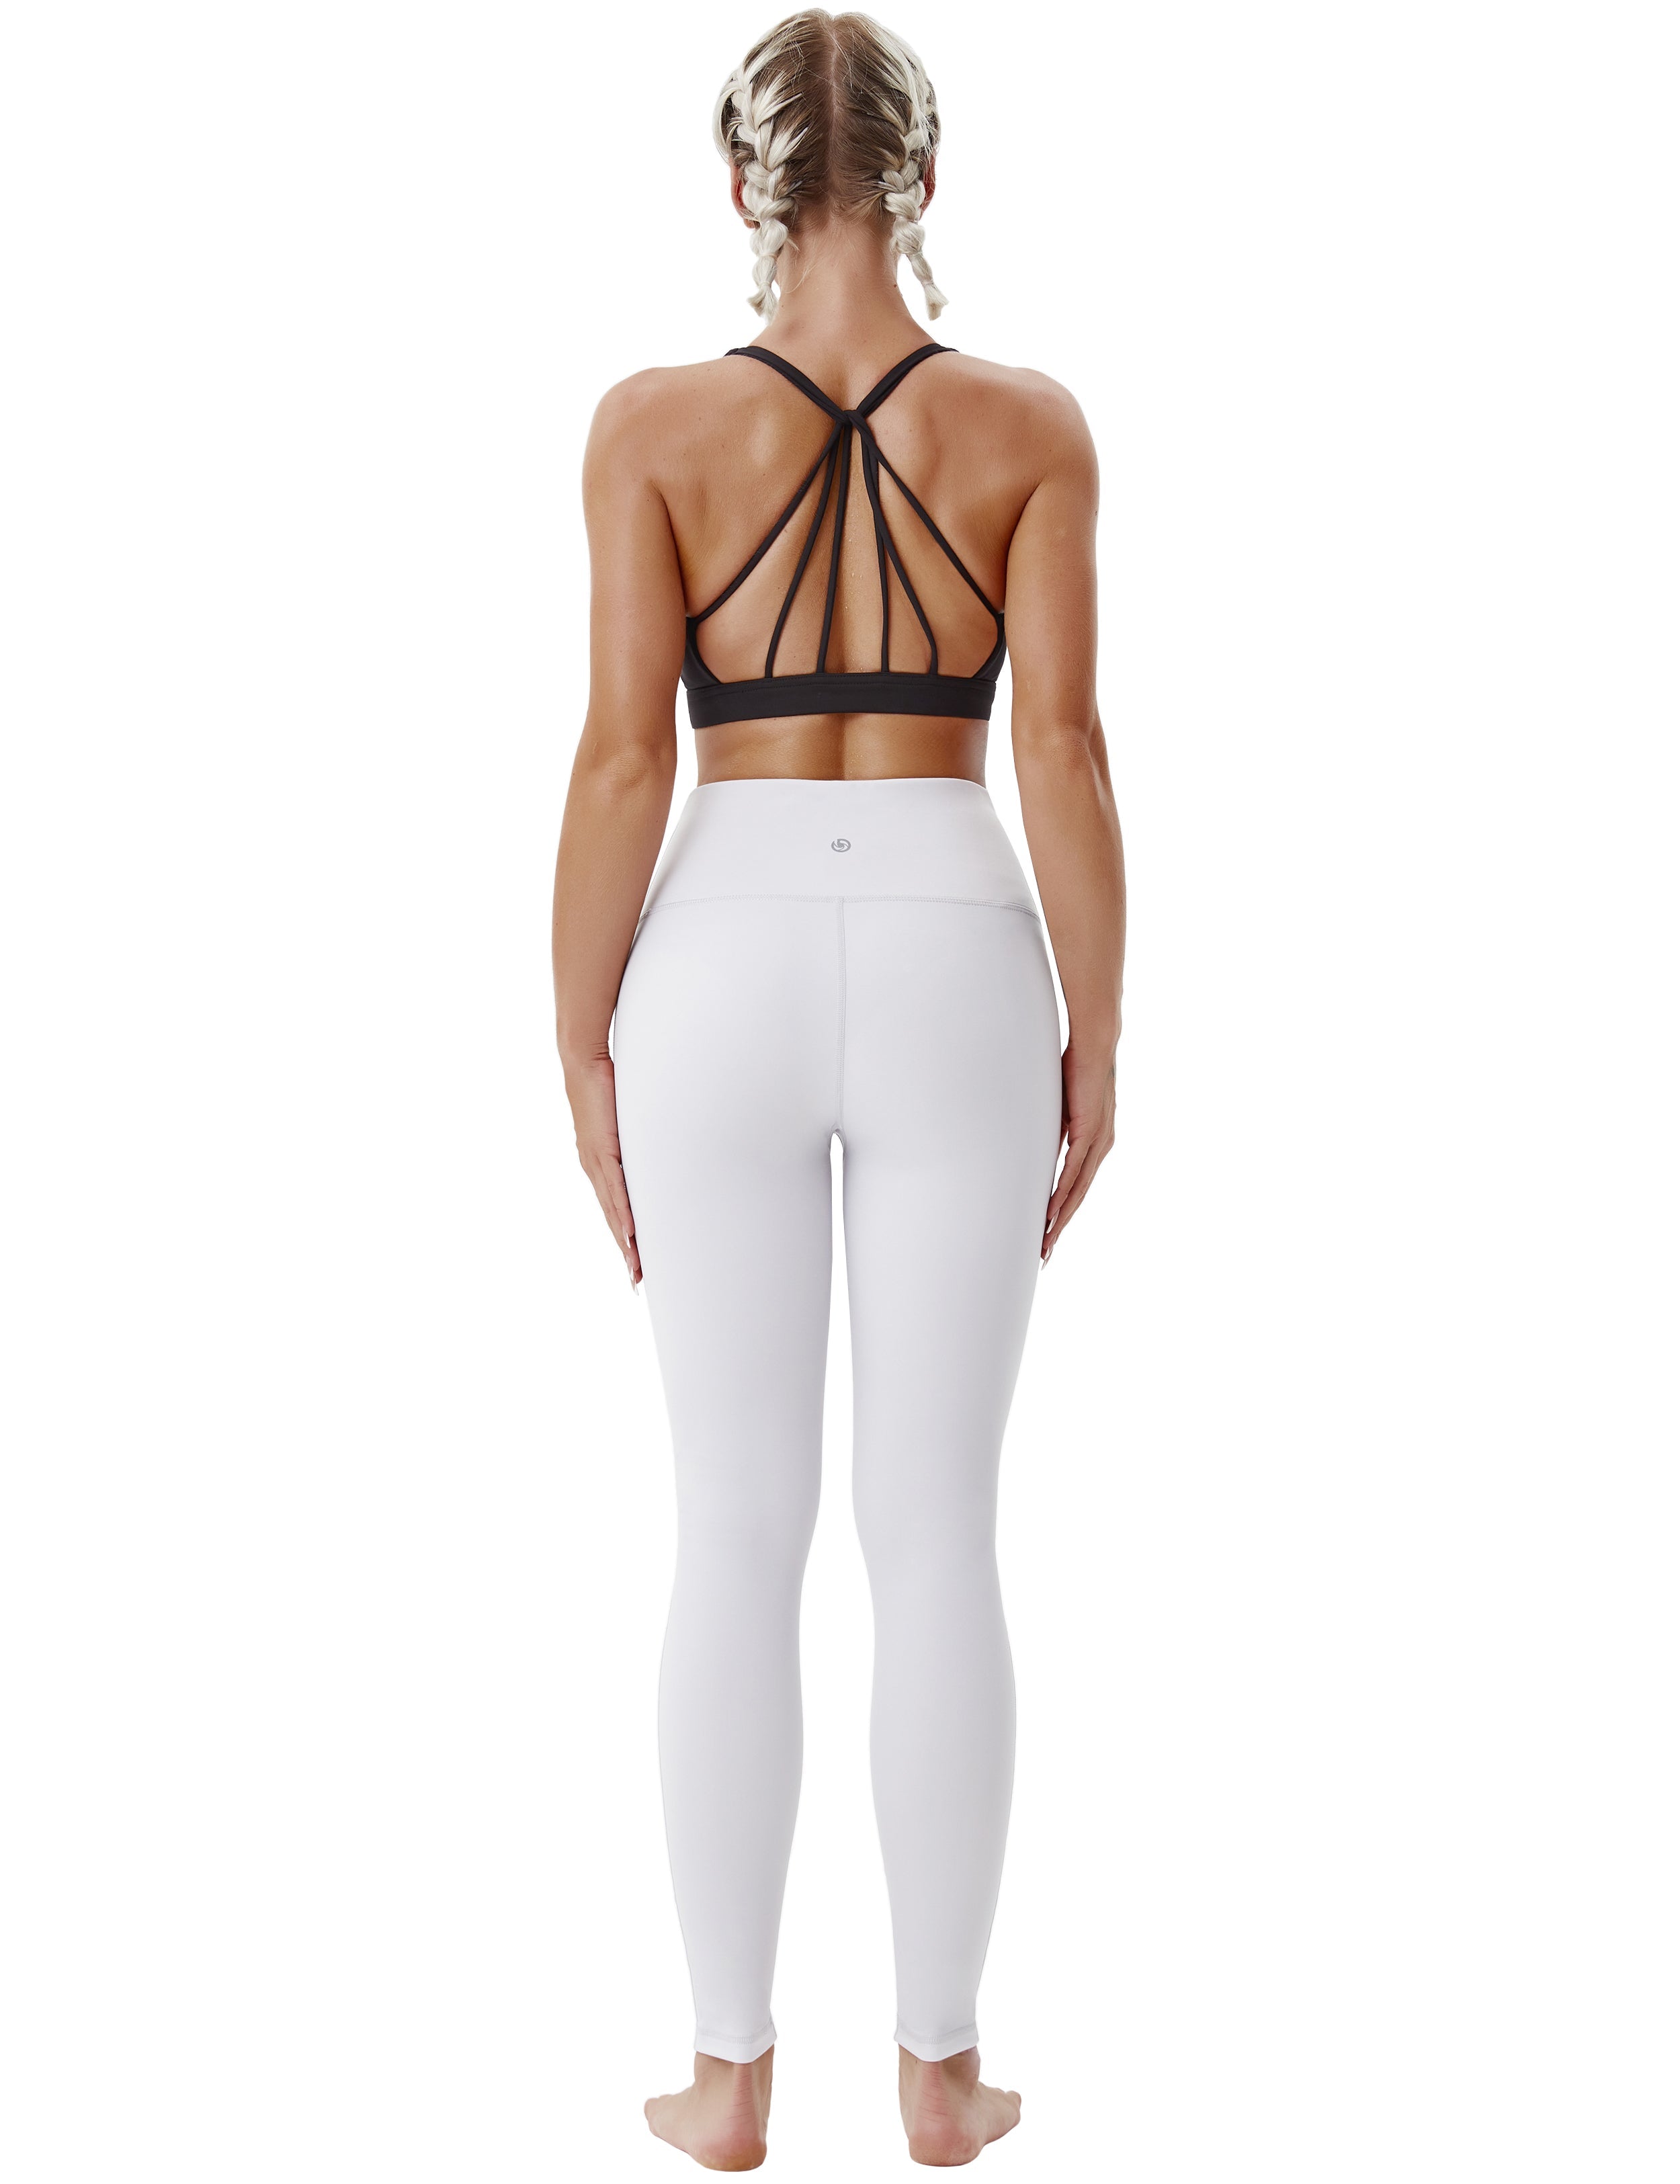 High Waist Side Line Biking Pants lightgray Side Line is Make Your Legs Look Longer and Thinner 75%Nylon/25%Spandex Fabric doesn't attract lint easily 4-way stretch No see-through Moisture-wicking Tummy control Inner pocket Two lengths